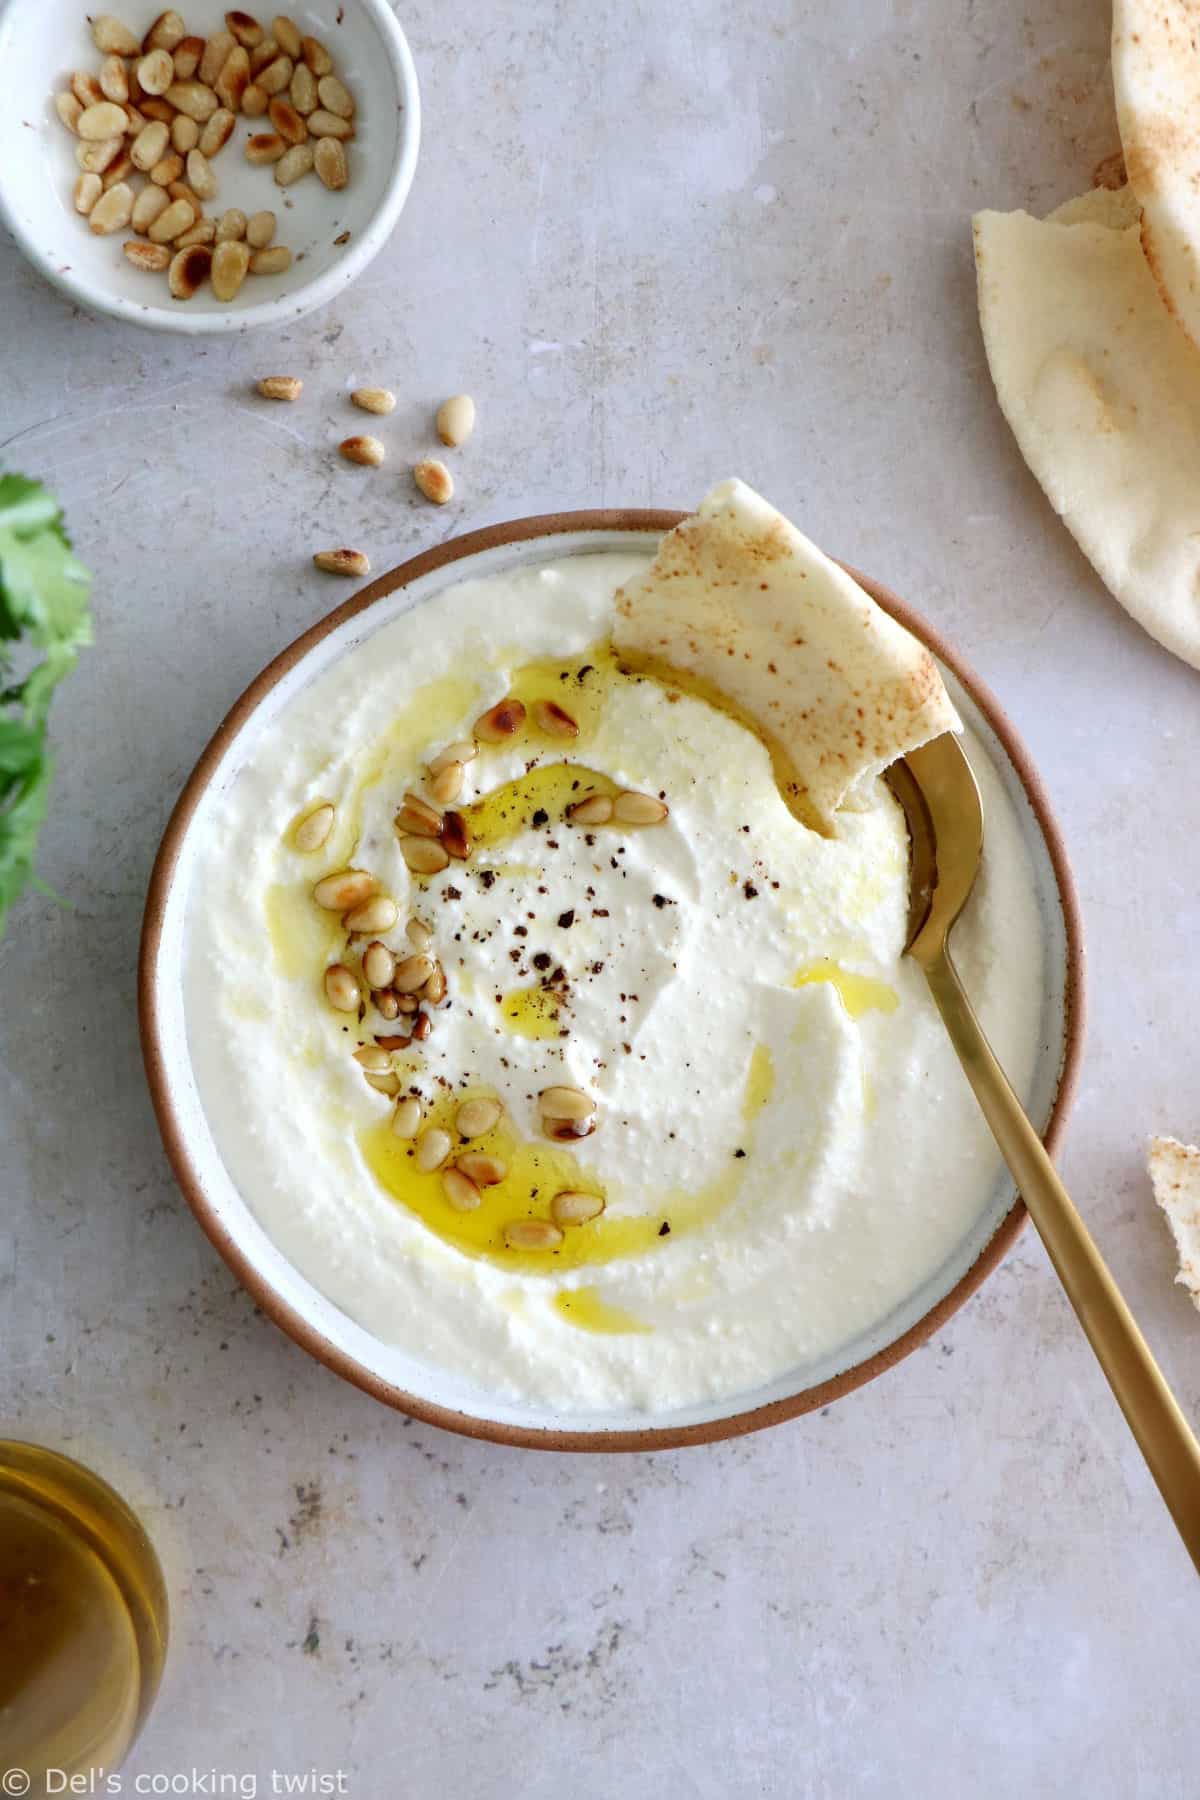 Whipped feta dip is a creamy and refreshing cheese dip. Ready in 5 minutes, it's an easy appetizer to serve with pita chips, raw vegetables or other toppings of choice.